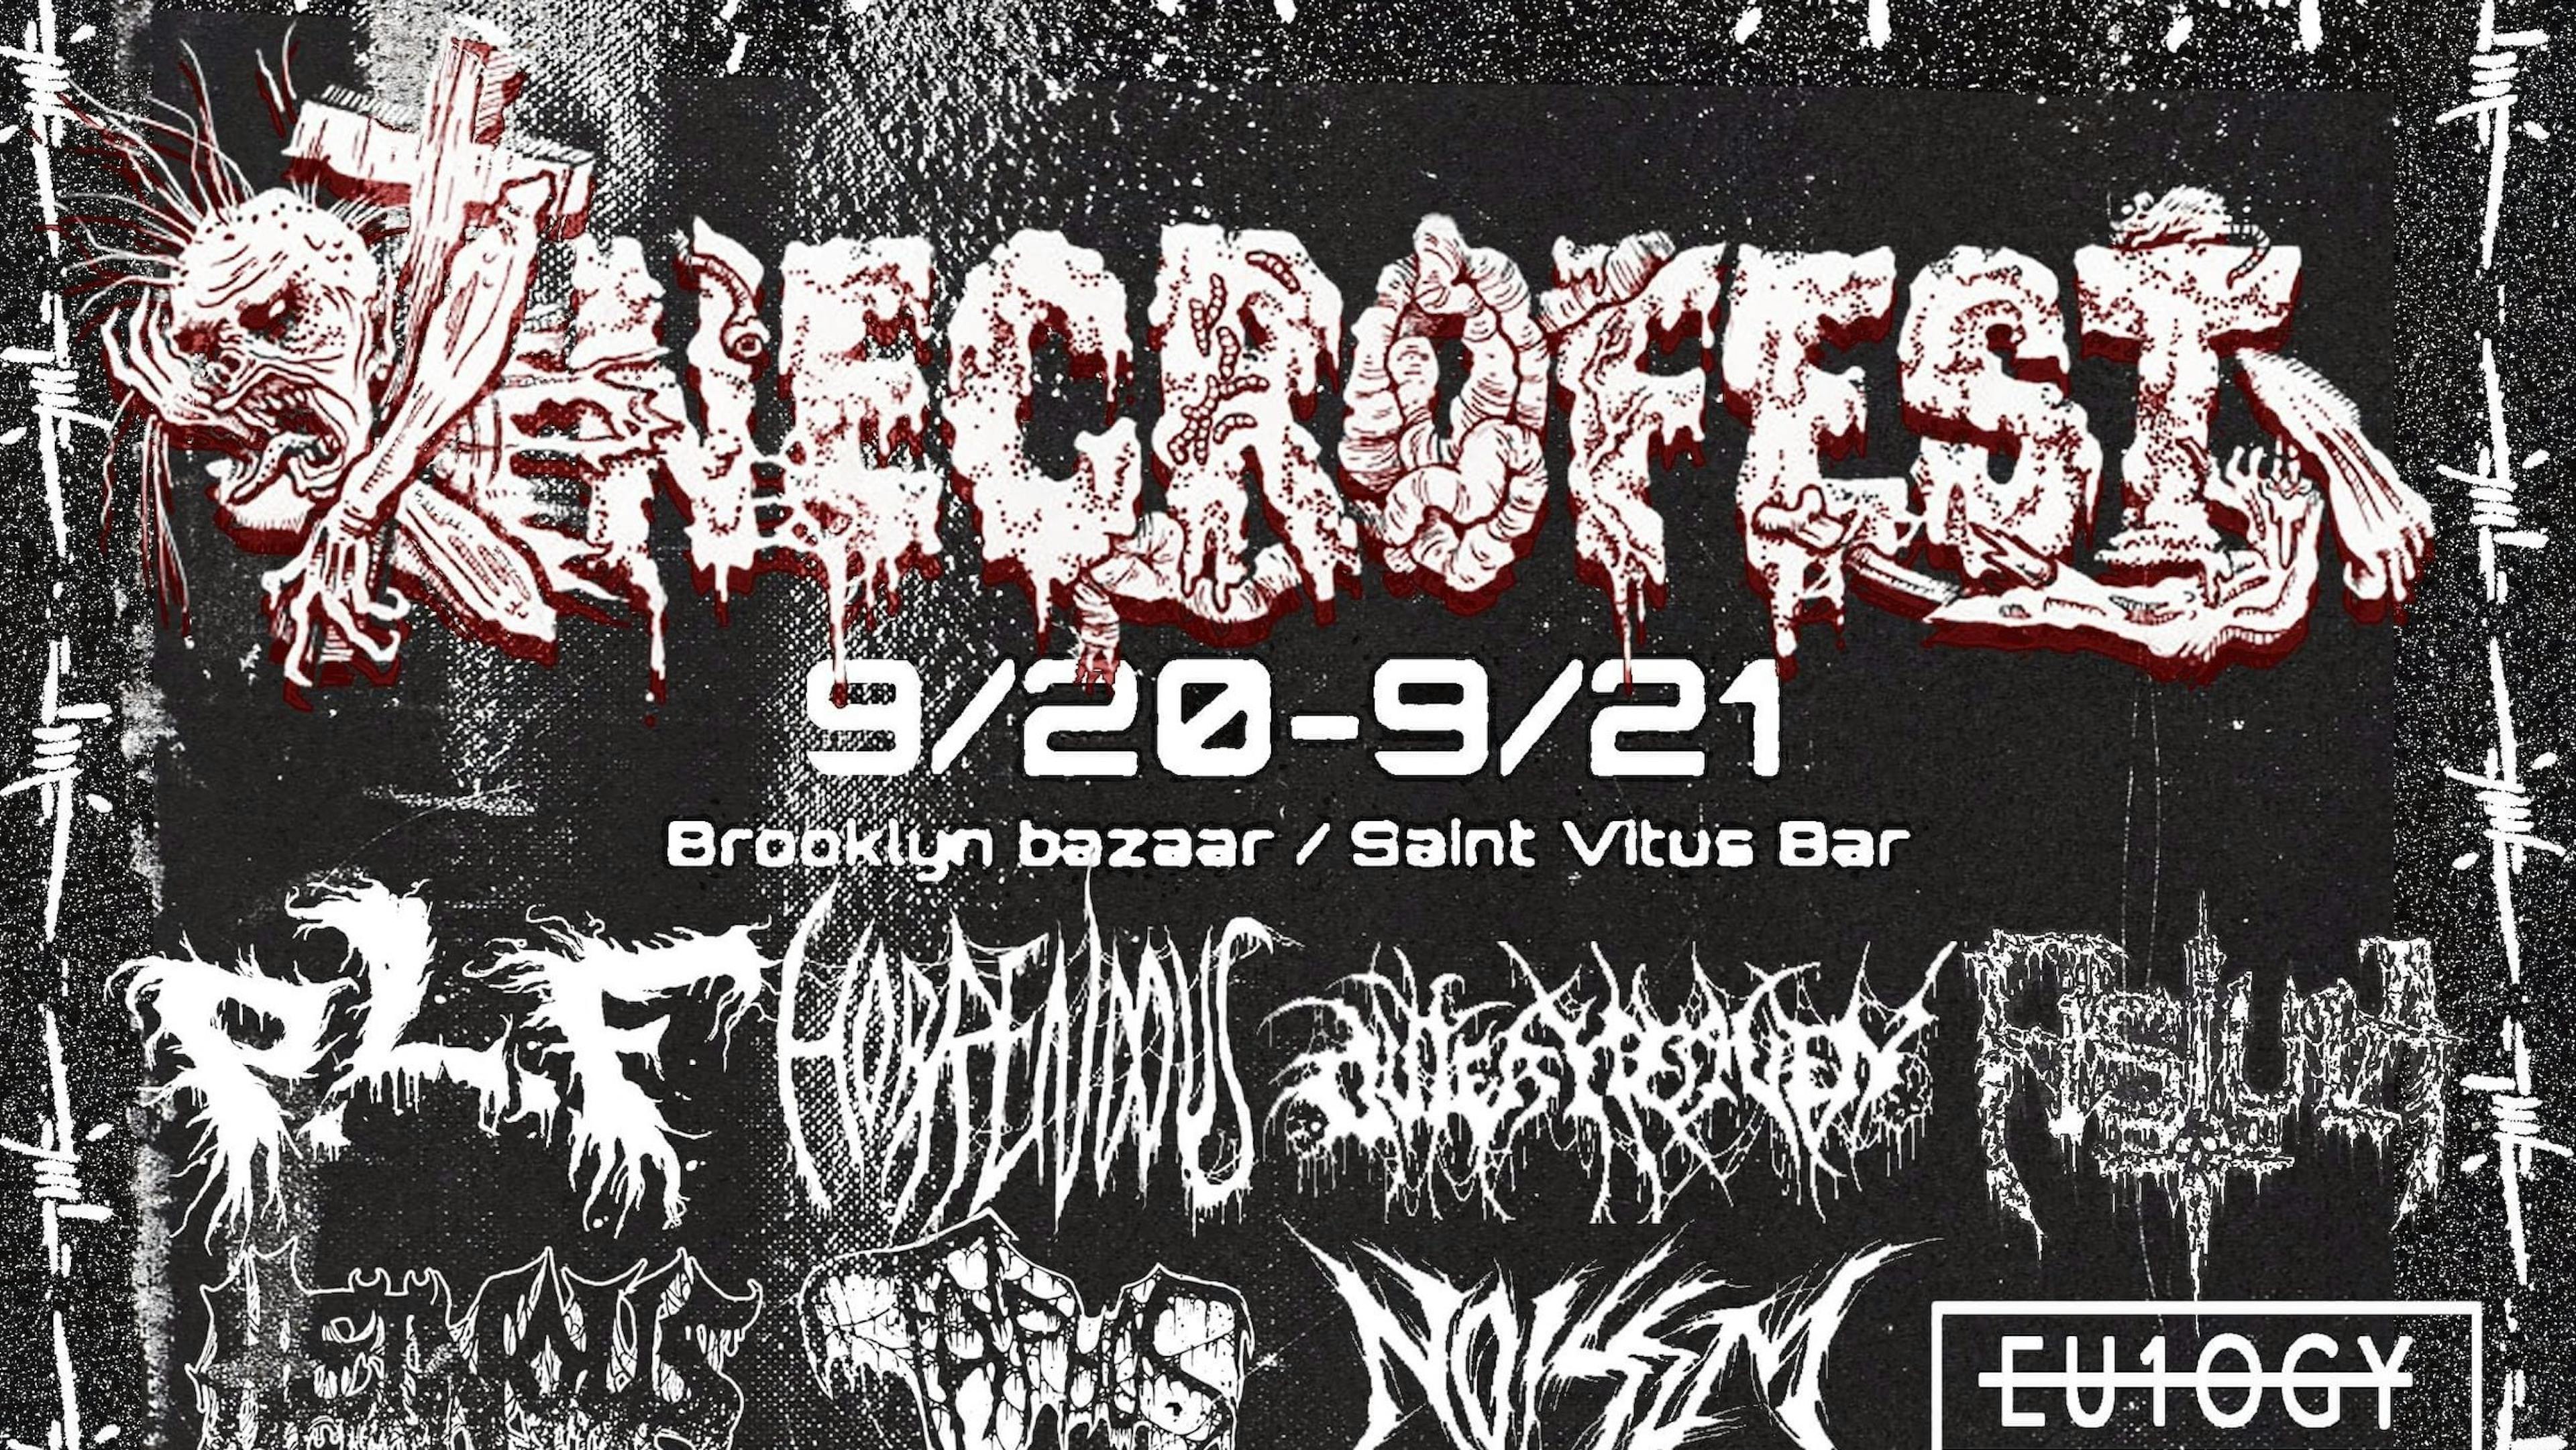 New York's Necrofest Looks To Be A Repulsively Good Time